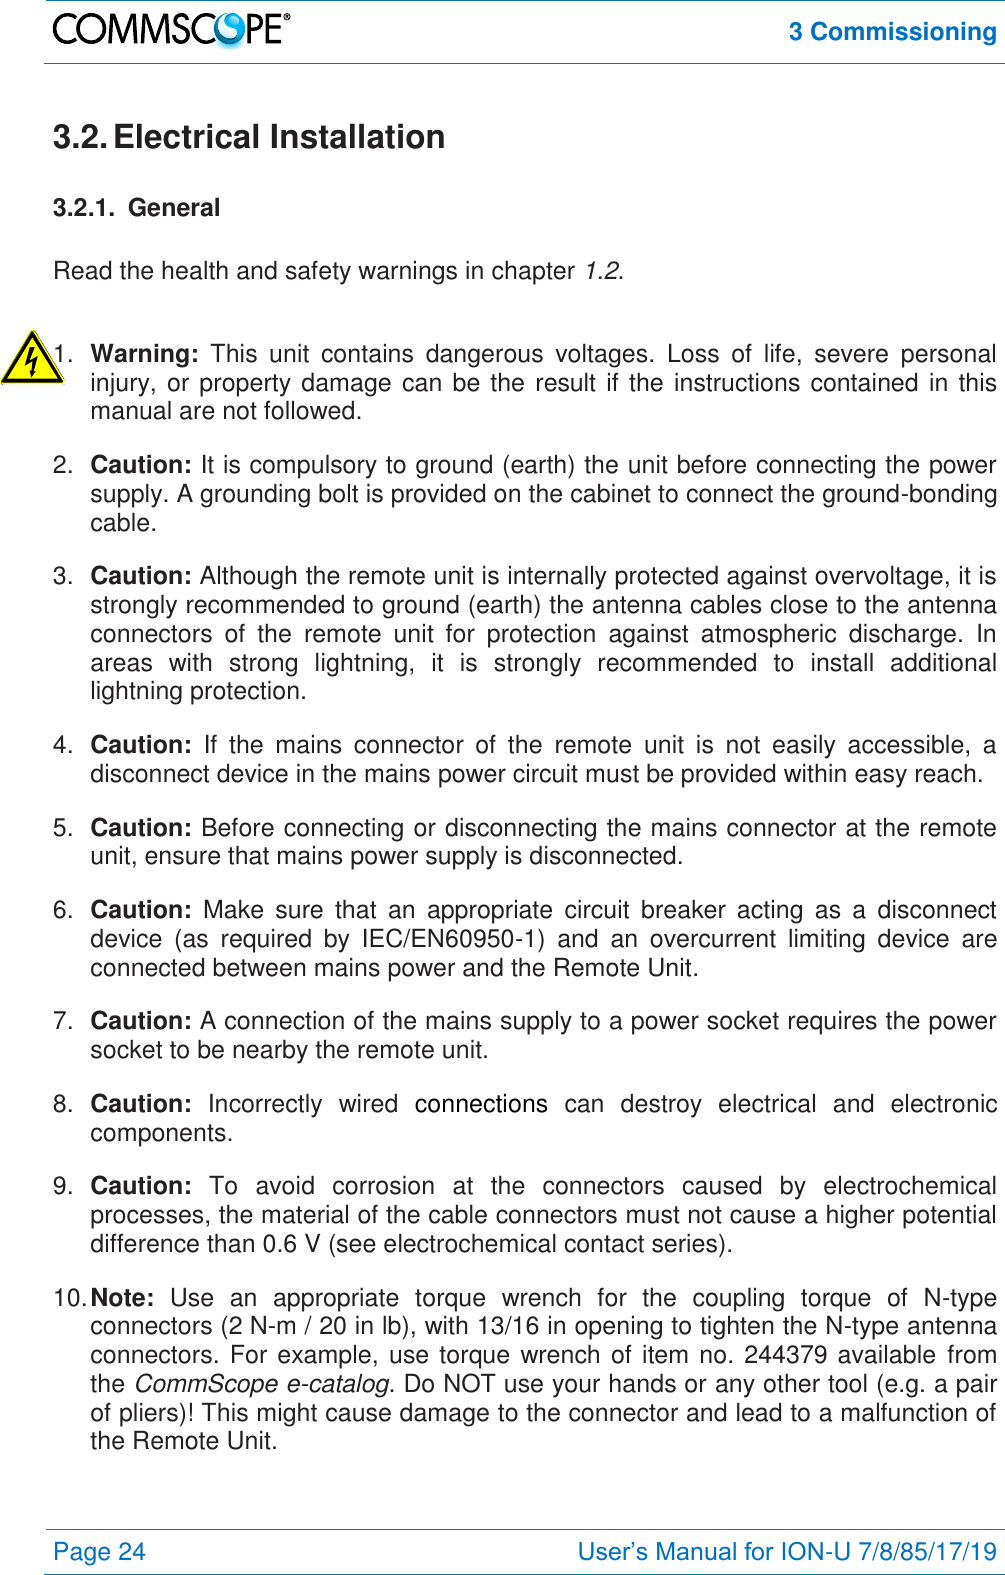  3 Commissioning  Page 24 User’s Manual for ION-U 7/8/85/17/19  3.2. Electrical Installation 3.2.1.  General  Read the health and safety warnings in chapter 1.2.  1. Warning:  This  unit  contains  dangerous  voltages.  Loss  of  life,  severe  personal injury, or property damage can be the result if the instructions contained in this manual are not followed. 2. Caution: It is compulsory to ground (earth) the unit before connecting the power supply. A grounding bolt is provided on the cabinet to connect the ground-bonding cable. 3. Caution: Although the remote unit is internally protected against overvoltage, it is strongly recommended to ground (earth) the antenna cables close to the antenna connectors  of  the  remote  unit  for  protection  against  atmospheric  discharge.  In areas  with  strong  lightning,  it  is  strongly  recommended  to  install  additional lightning protection. 4. Caution:  If  the  mains  connector  of  the  remote  unit  is  not  easily  accessible,  a disconnect device in the mains power circuit must be provided within easy reach. 5. Caution: Before connecting or disconnecting the mains connector at the remote unit, ensure that mains power supply is disconnected. 6. Caution:  Make  sure  that  an  appropriate  circuit  breaker  acting  as  a  disconnect device  (as  required  by  IEC/EN60950-1)  and  an  overcurrent  limiting  device  are connected between mains power and the Remote Unit. 7. Caution: A connection of the mains supply to a power socket requires the power socket to be nearby the remote unit. 8. Caution:  Incorrectly  wired  connections  can  destroy  electrical  and  electronic components. 9. Caution:  To  avoid  corrosion  at  the  connectors  caused  by  electrochemical processes, the material of the cable connectors must not cause a higher potential difference than 0.6 V (see electrochemical contact series). 10. Note:  Use  an  appropriate  torque  wrench  for  the  coupling  torque  of  N-type connectors (2 N-m / 20 in lb), with 13/16 in opening to tighten the N-type antenna connectors. For example, use torque wrench of item no. 244379 available  from the CommScope e-catalog. Do NOT use your hands or any other tool (e.g. a pair of pliers)! This might cause damage to the connector and lead to a malfunction of the Remote Unit. 